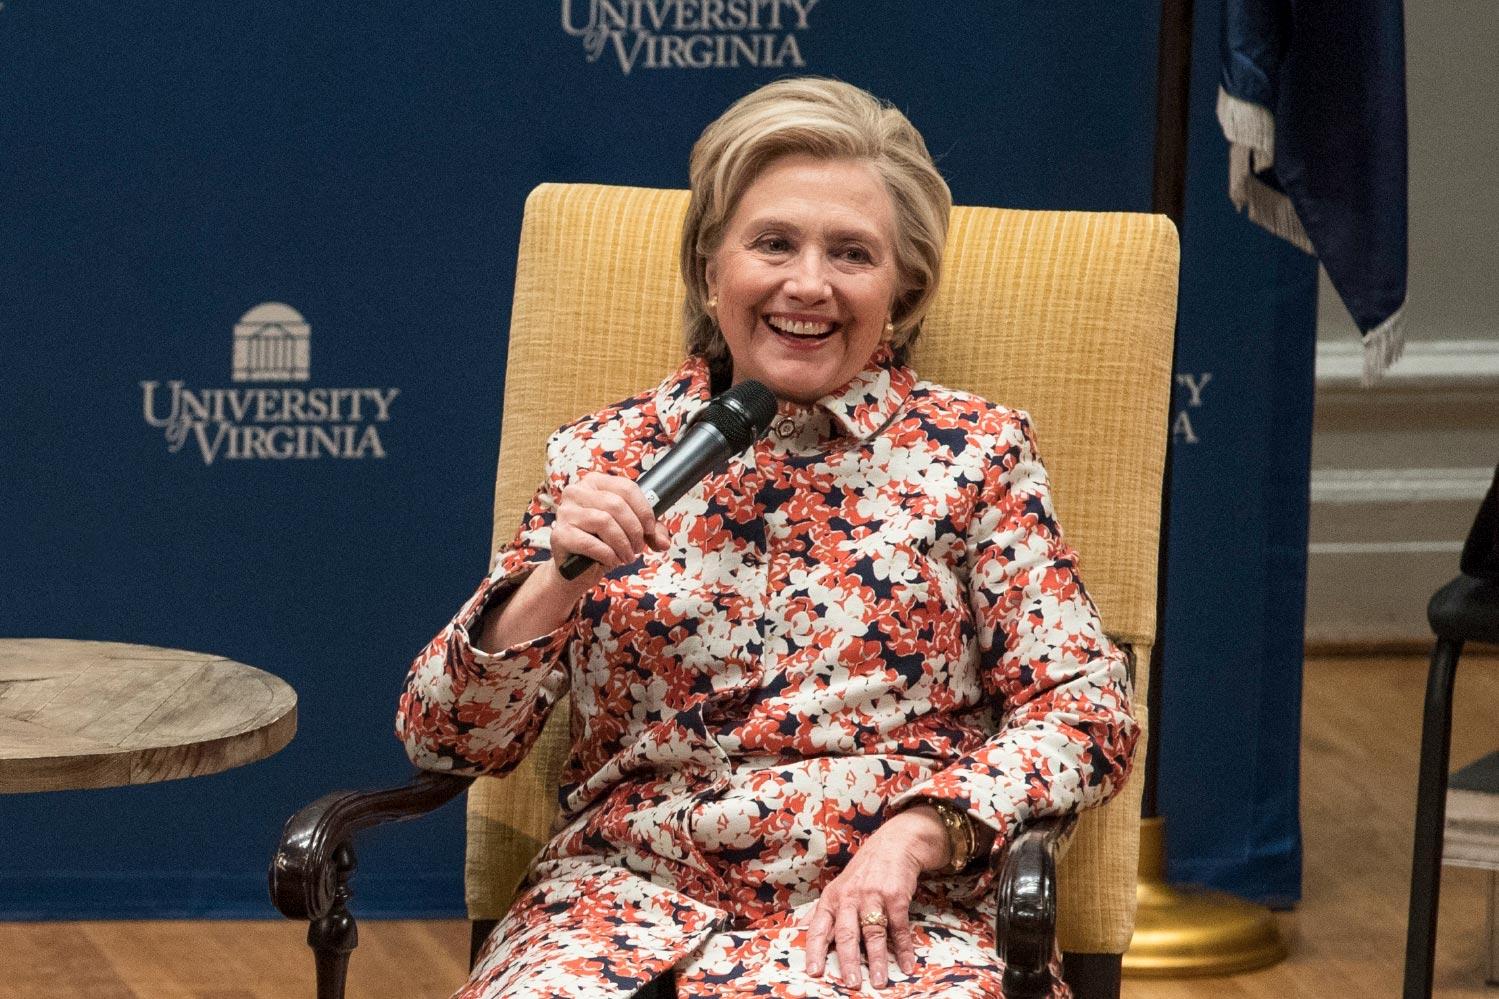 Hillary Clinton delivered prepared remarks before sitting for a conversation with Virginia first lady Dorothy McAuliffe. (Photos by Dan Addison, University Communications)